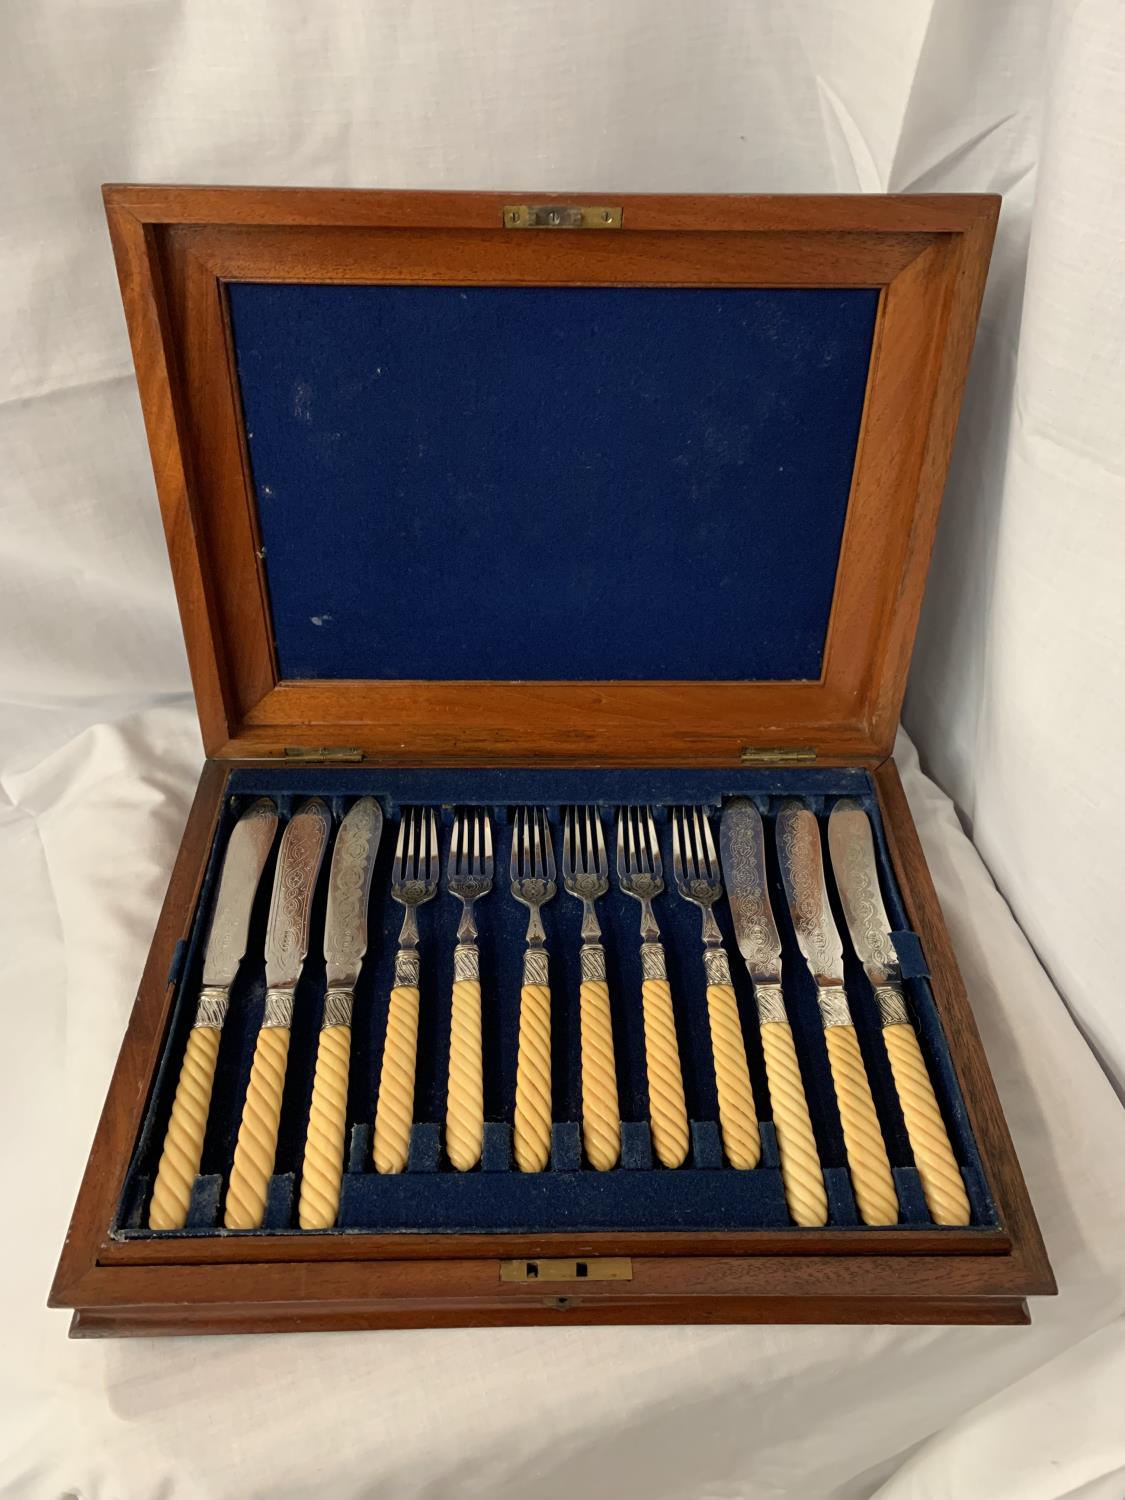 A VINTAGE MAHOGANY CANTEEN OF FLATWARE HEALY ENGRAVED WITH BARLEY TWIST HANDLES. SIX PLACE SETTING